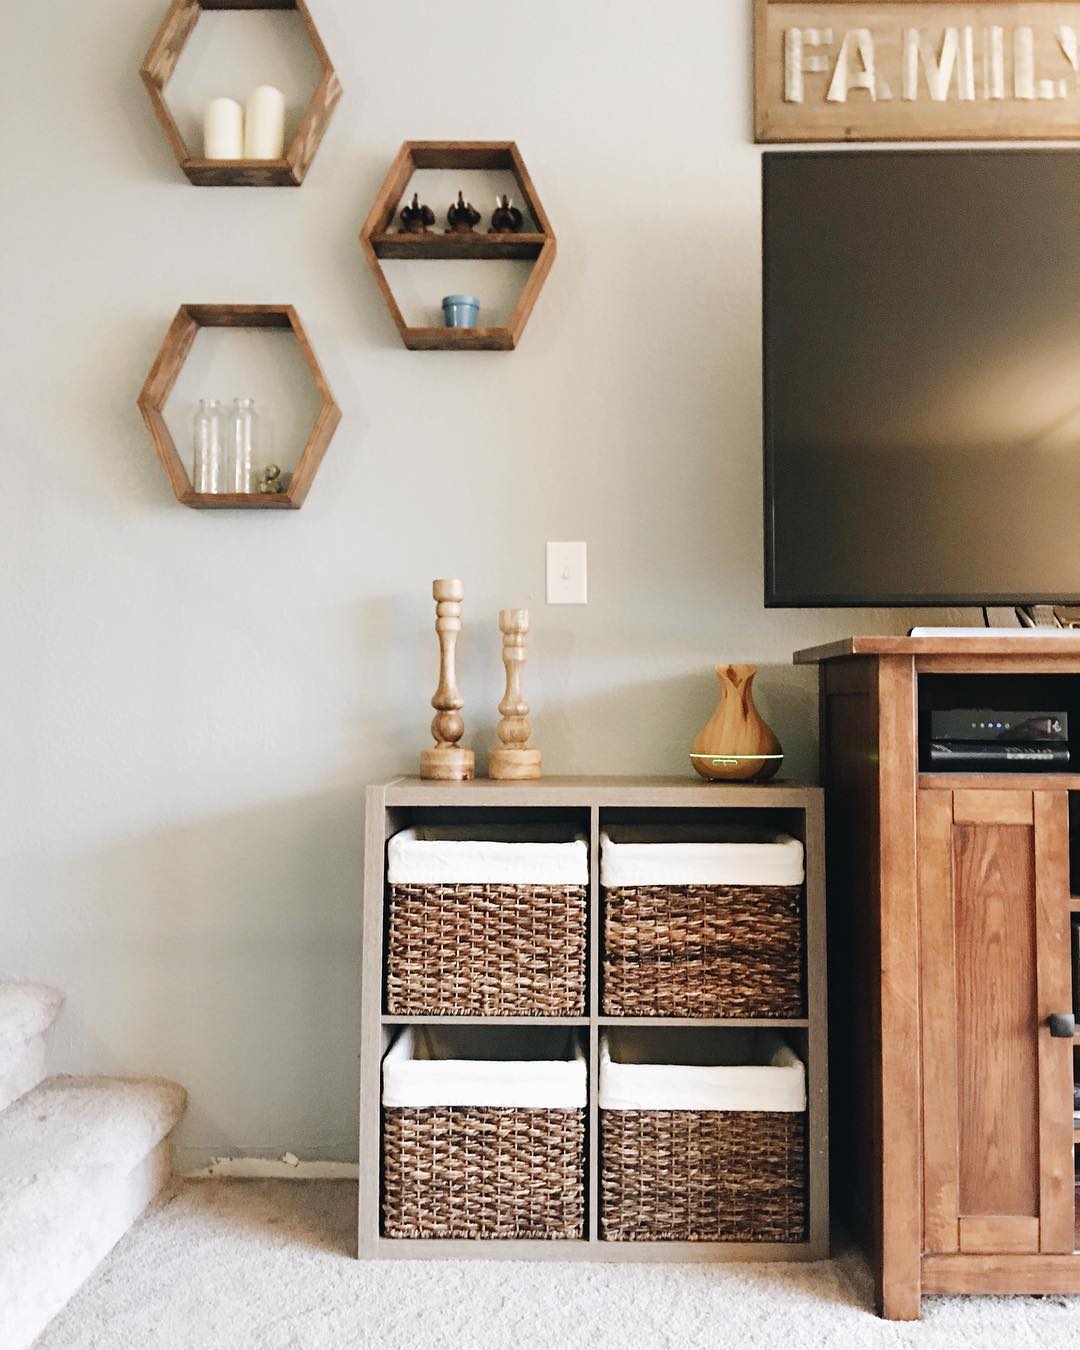 23 Storage Hacks for Small Space Living 